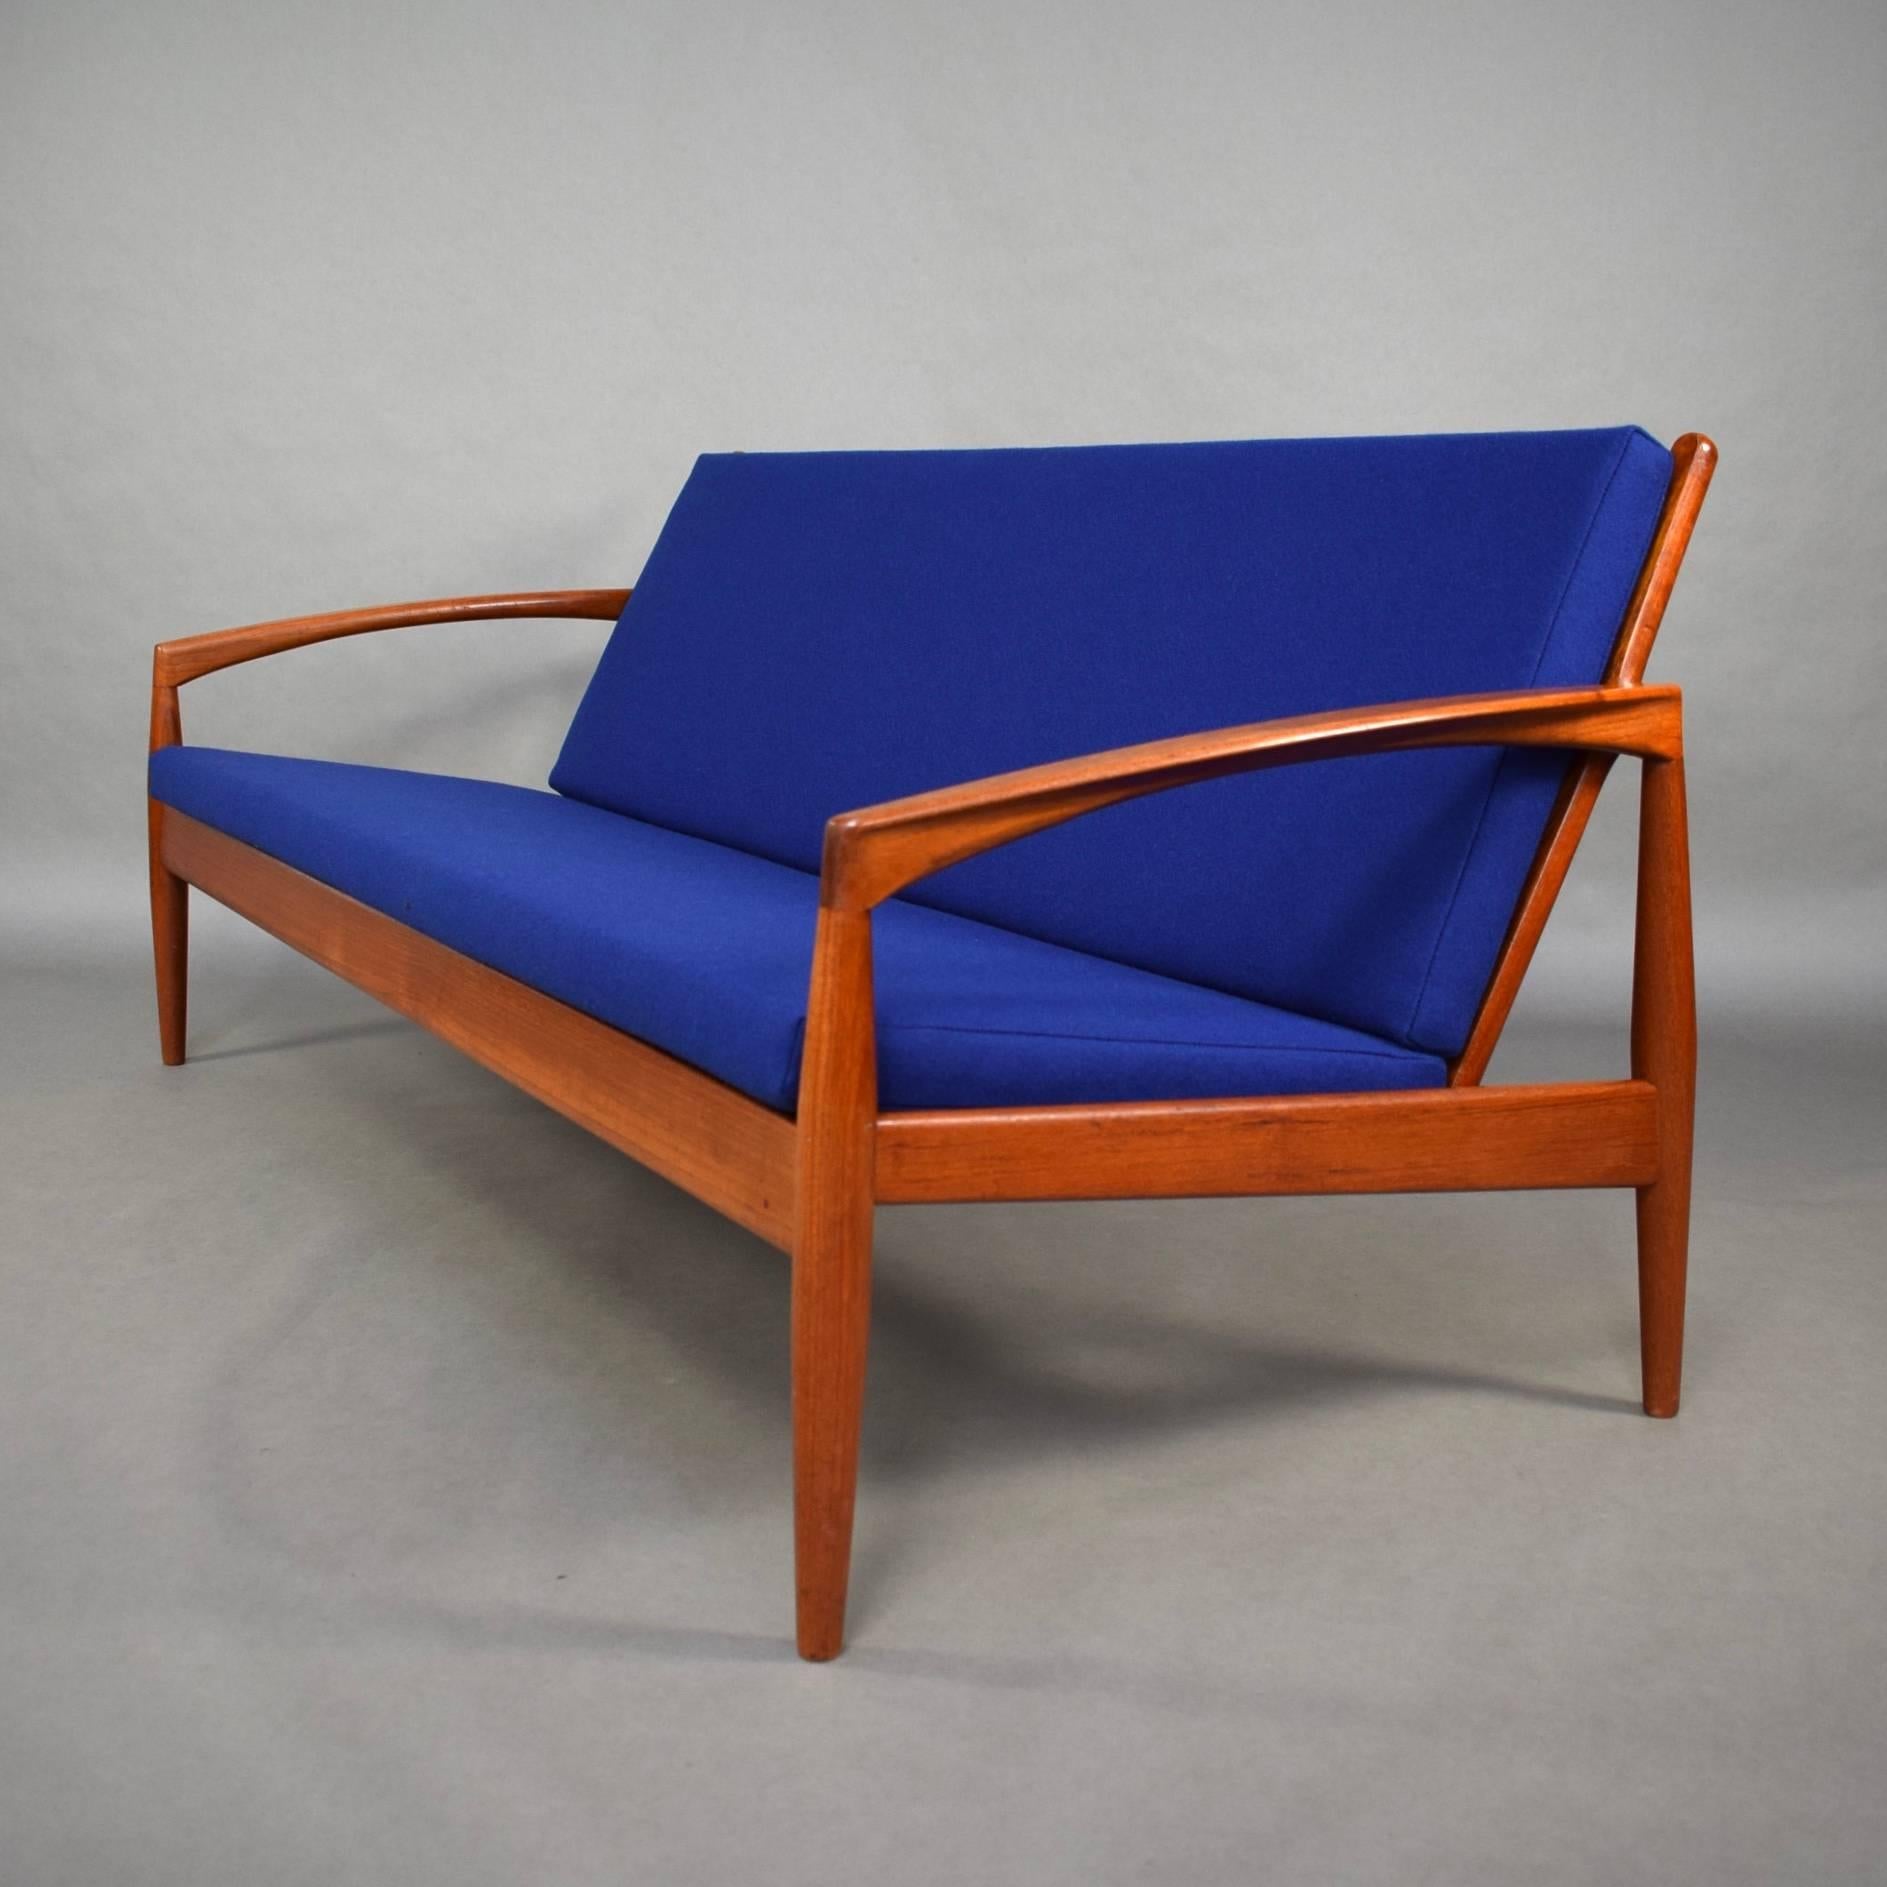 Elegant Paperknife sofa by Kai Kristiansen for Magnus Olesen - Denmark, 1960's. Excellent condition and reupholstered with a beautiful blue wool fabric (also new foam in the cushions). 

Designer: Kai Kristiansen

Manufacturer: Magnus